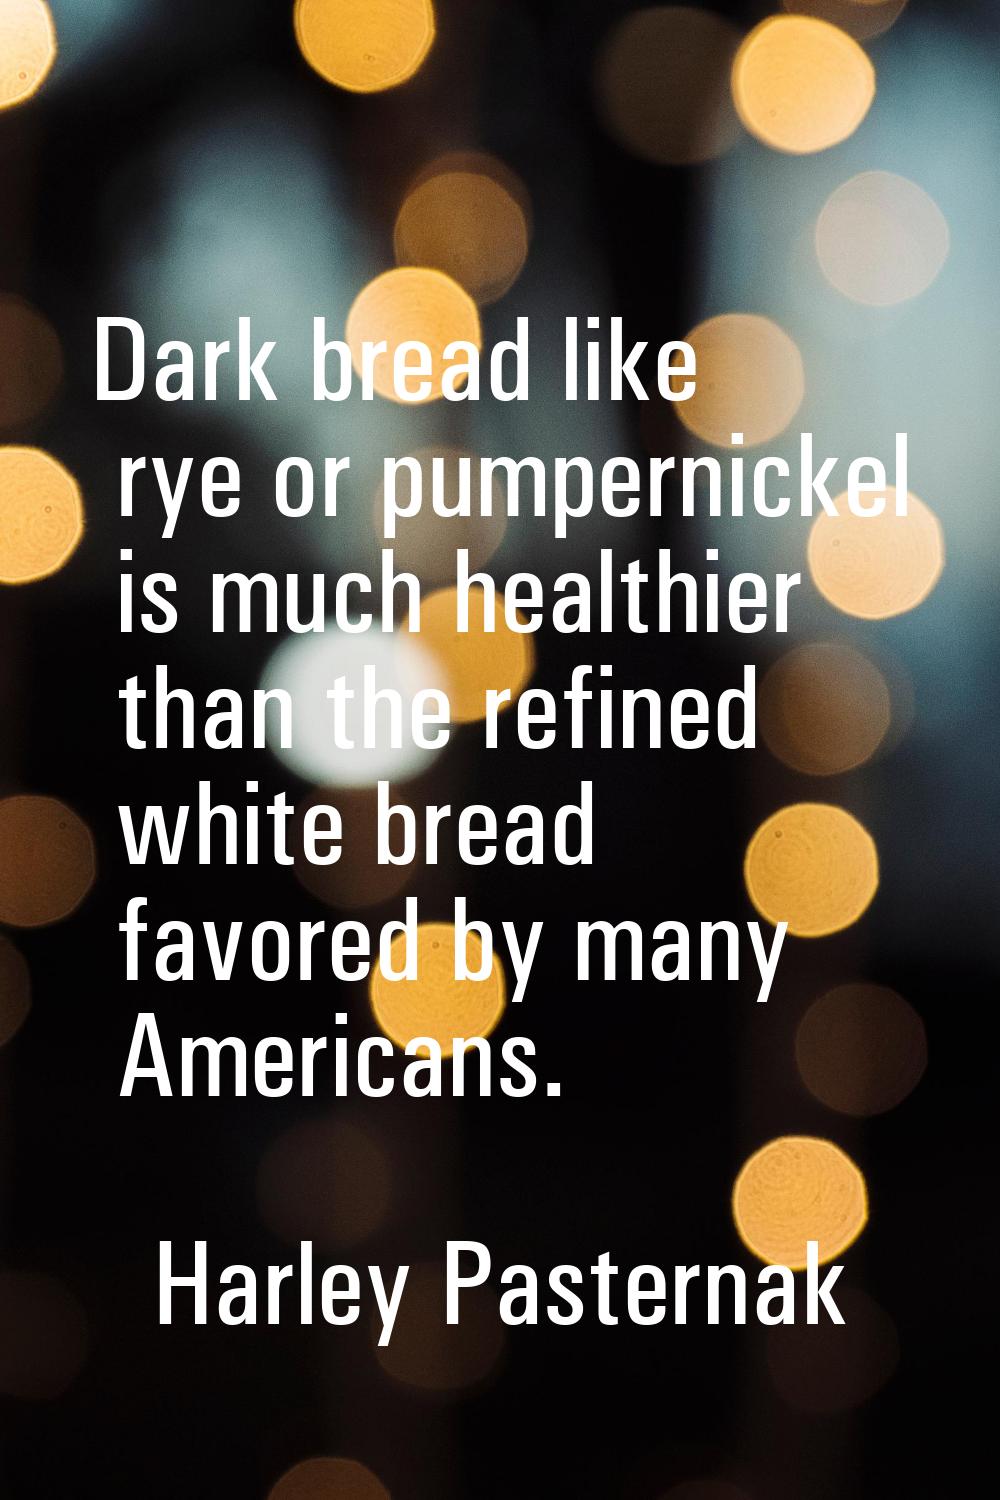 Dark bread like rye or pumpernickel is much healthier than the refined white bread favored by many 